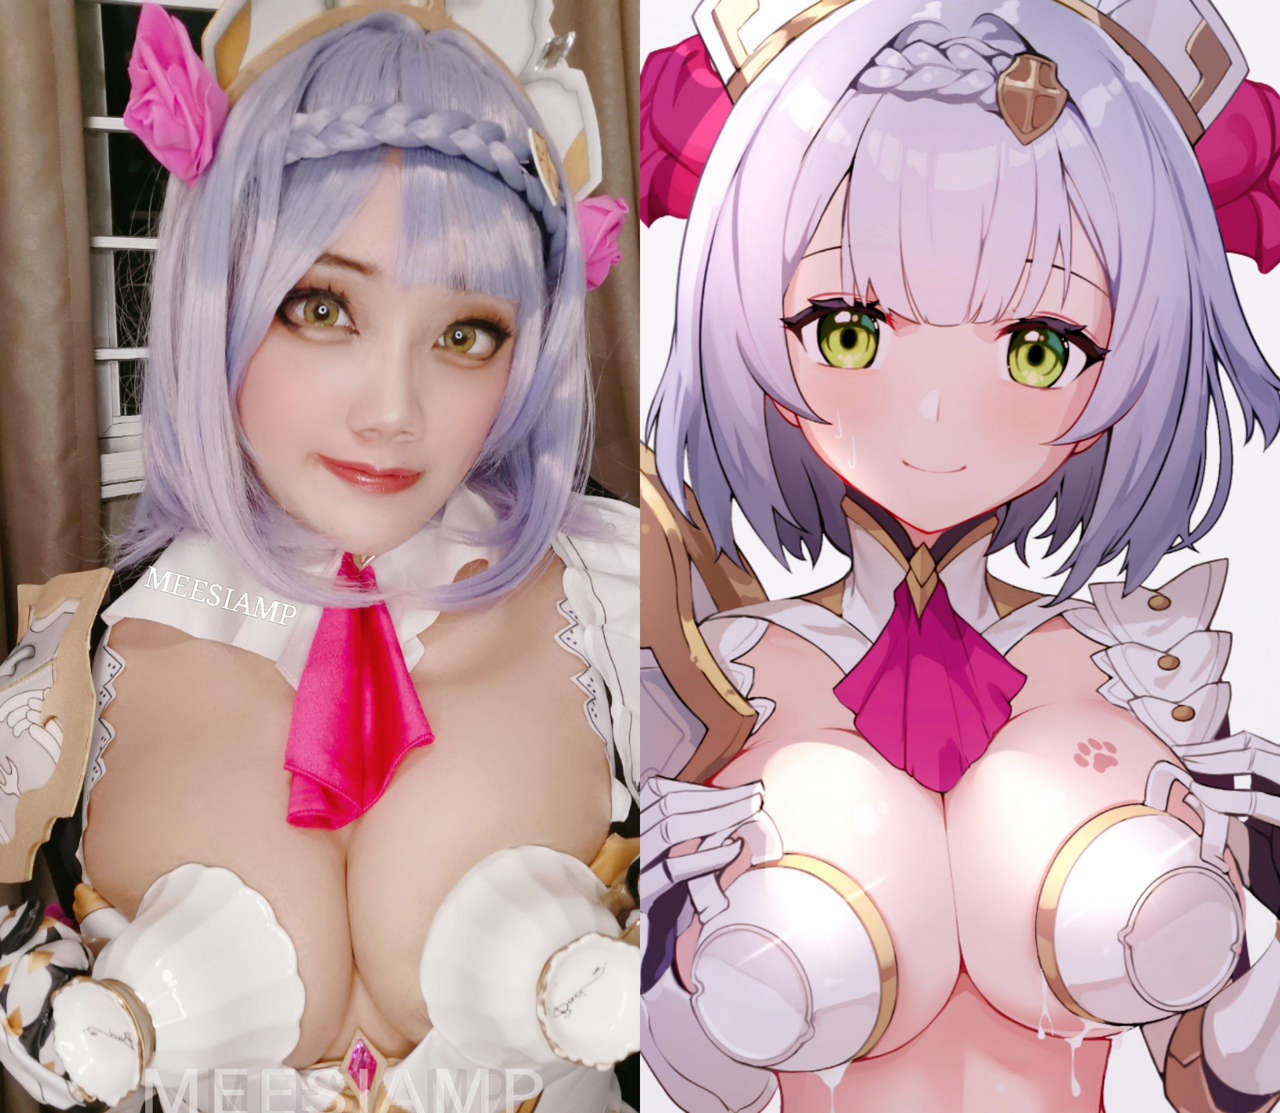 Noelle T Cups By Me Art Is By Ett0 On Twitter And I Have Their Permission To Us